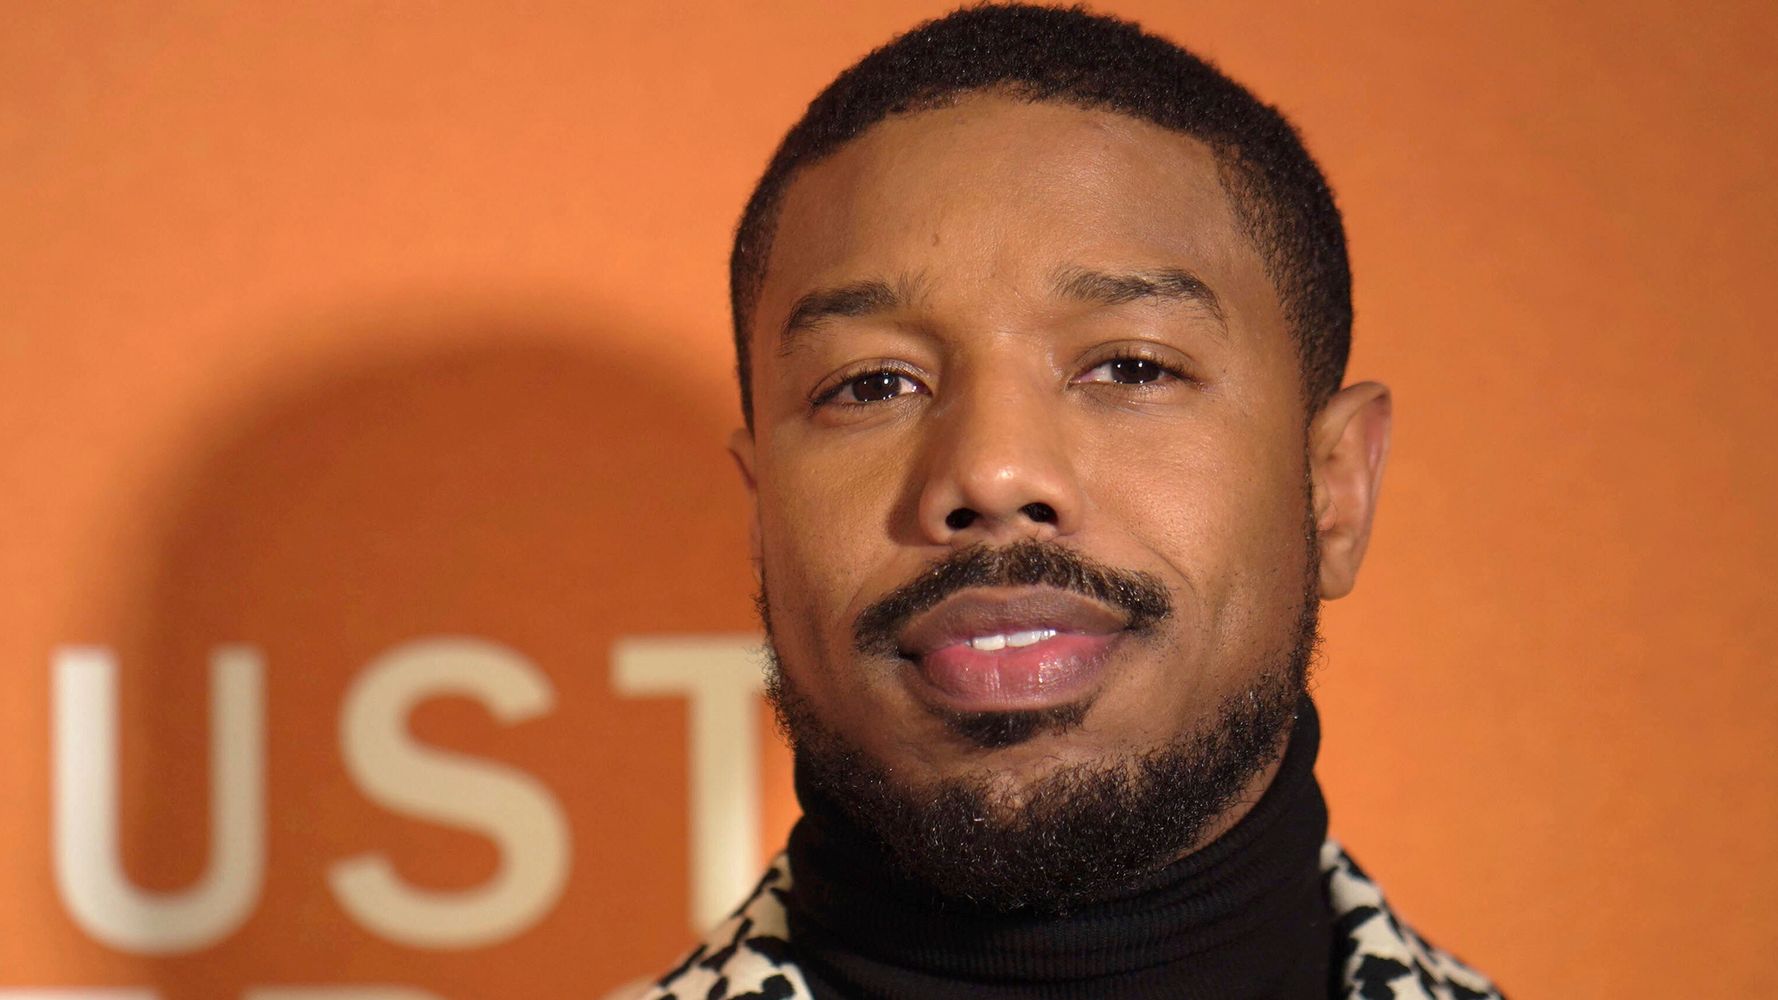 Michael B. Jordan Revealed As People’s ‘Sexiest Man Alive’ In The Most 2020 Way